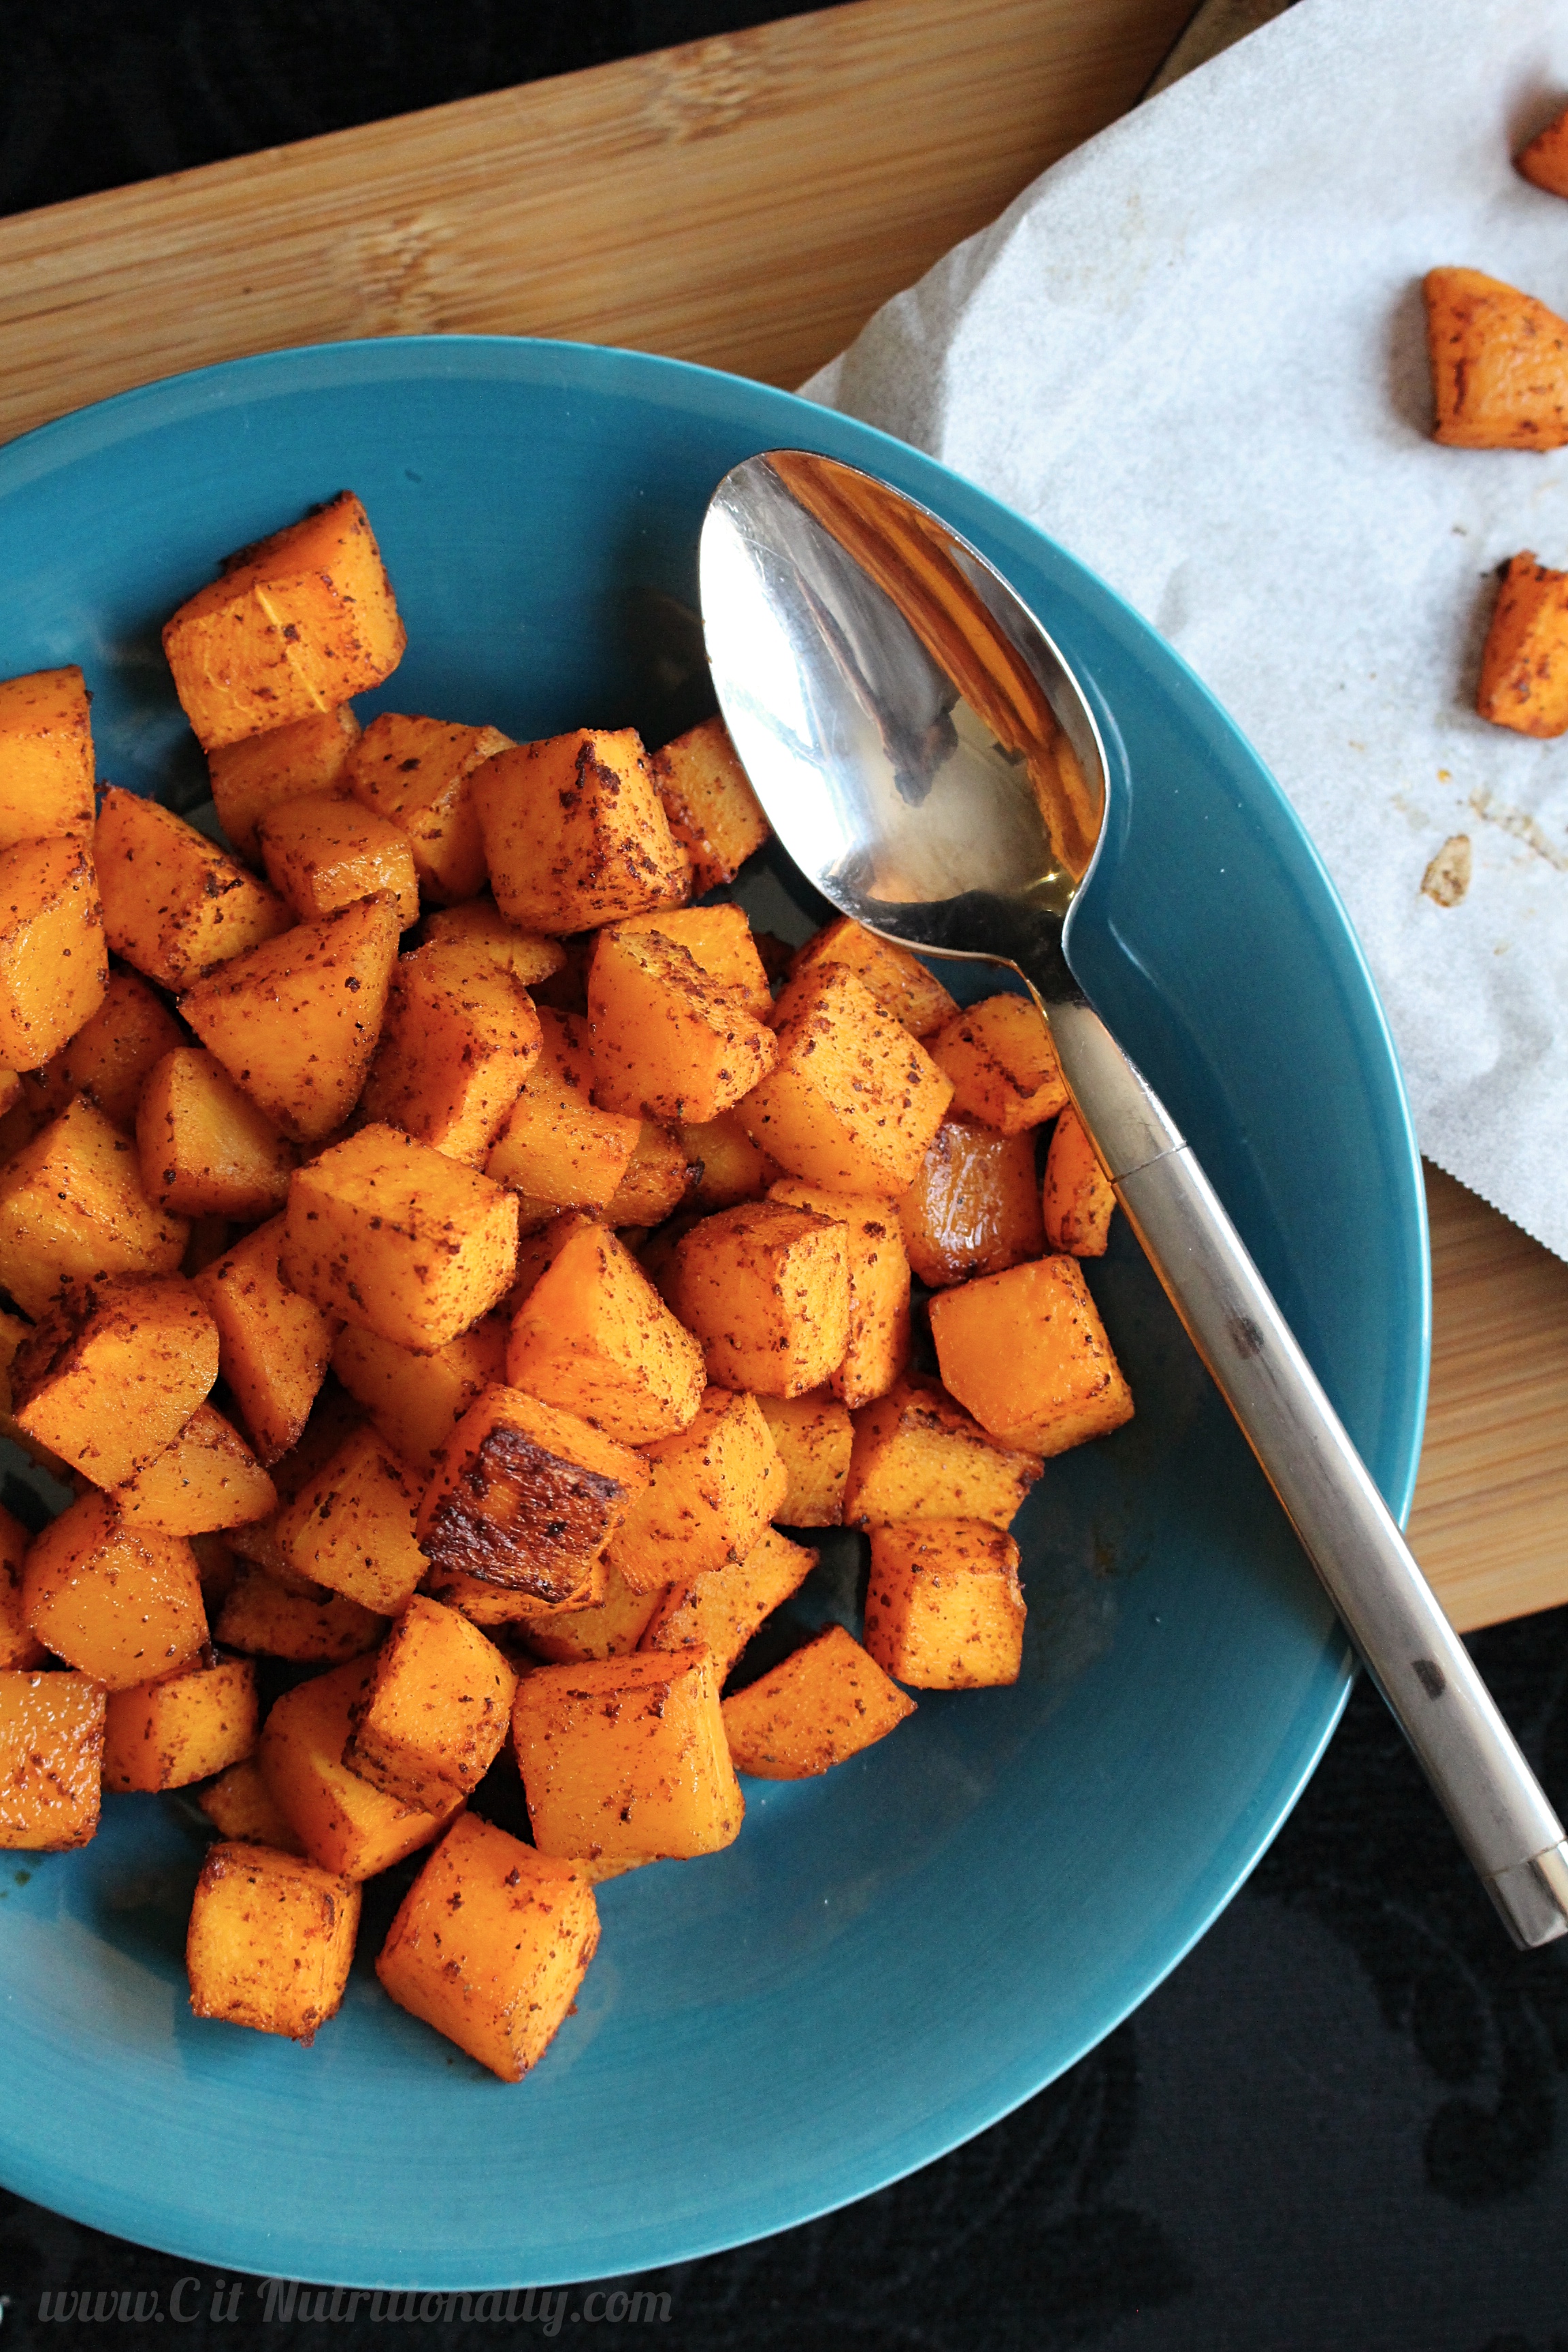 The BEST Roasted Butternut Squash + Healthy Eating on a Budget | C it Nutritionally #vegan #glutenfree #fall